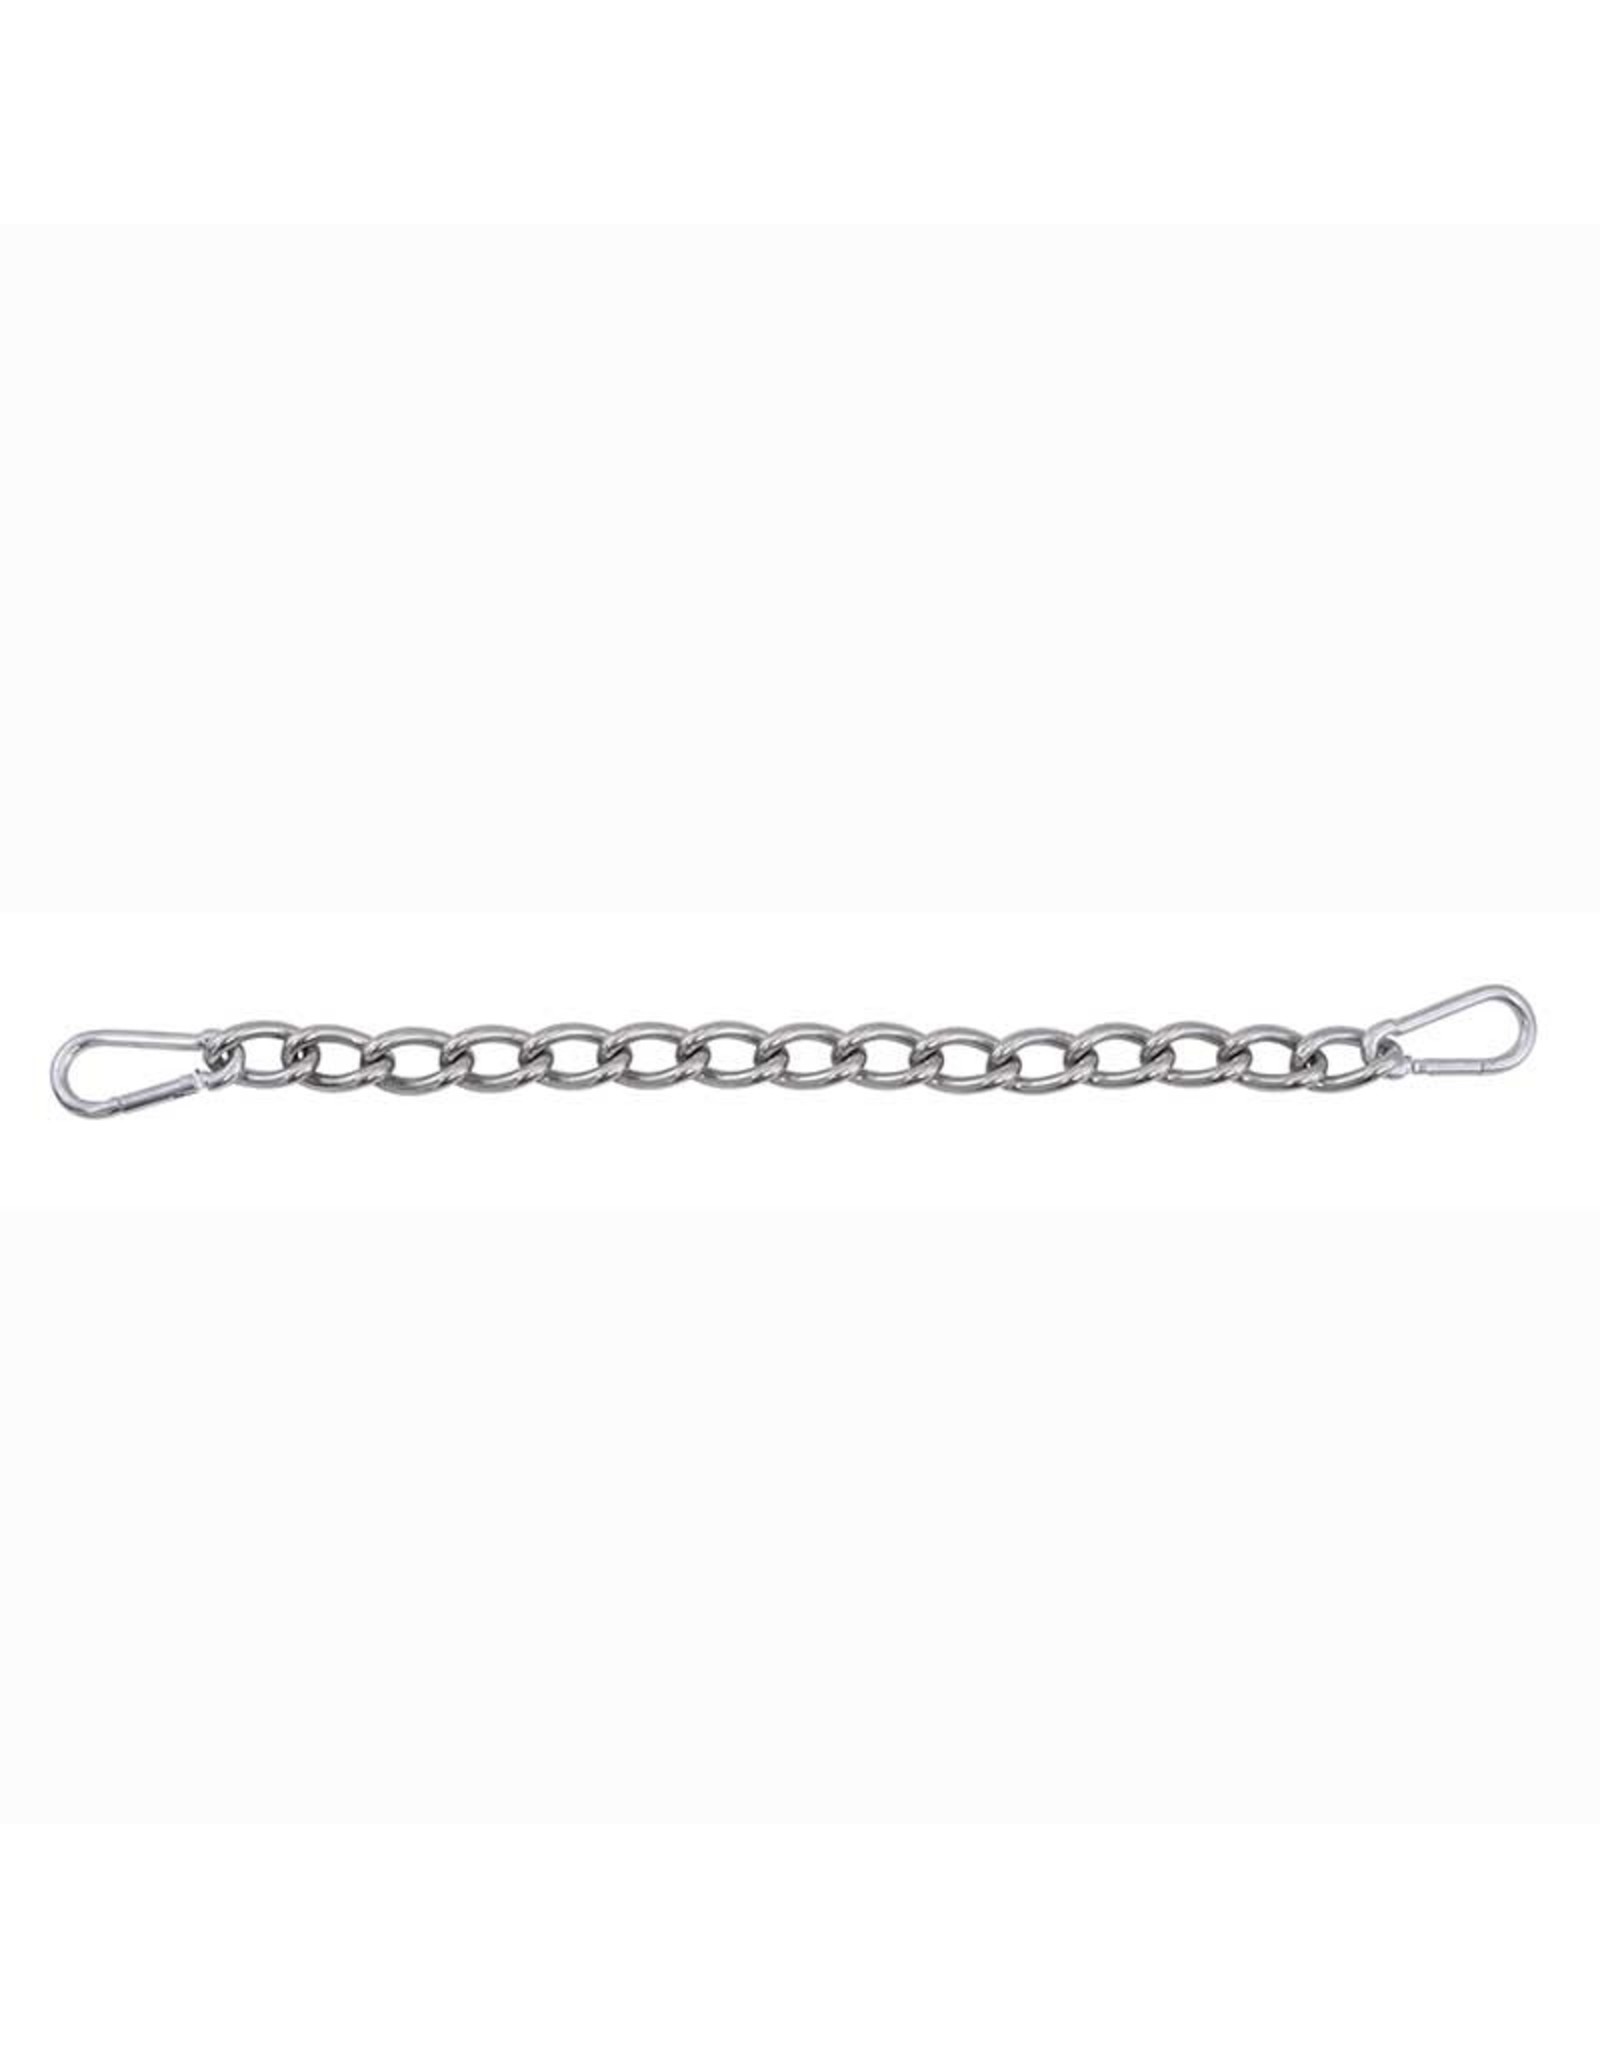 Partrade Stainless Steel Big Links 239200 with Spring Curb Chain